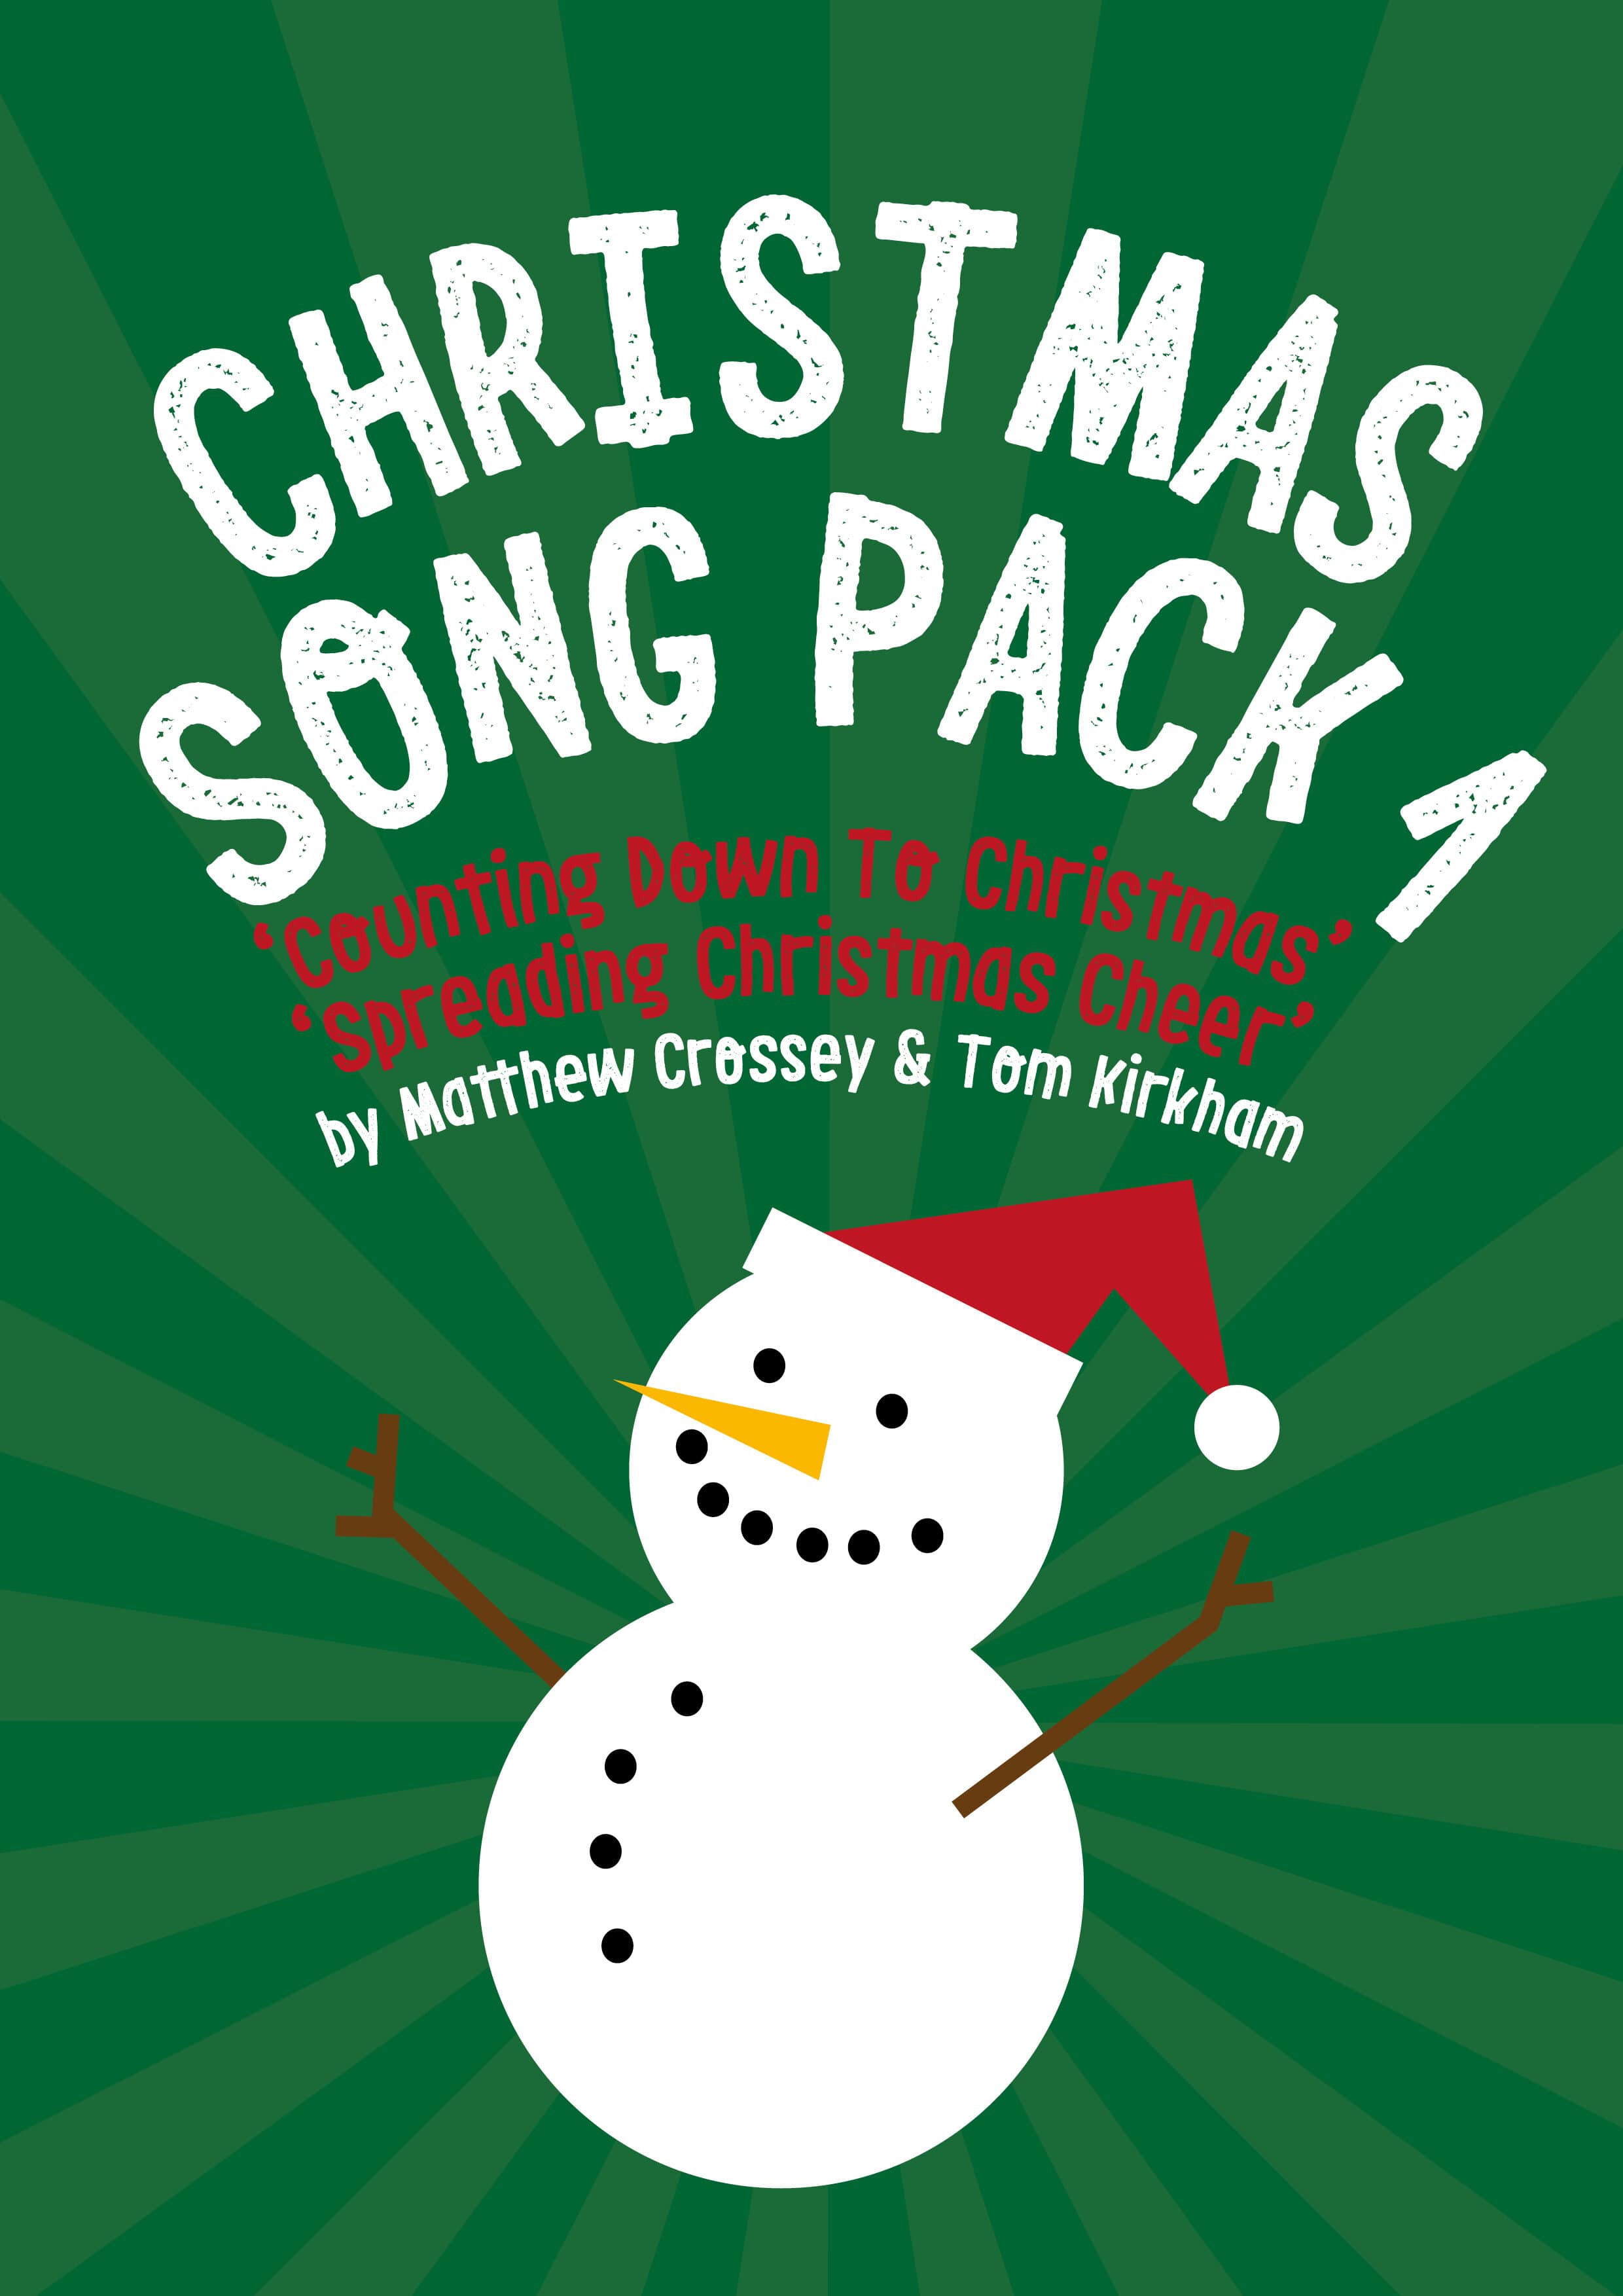 Christmas Songs Download Pack One - 100% discount with code CHRISTMAS1